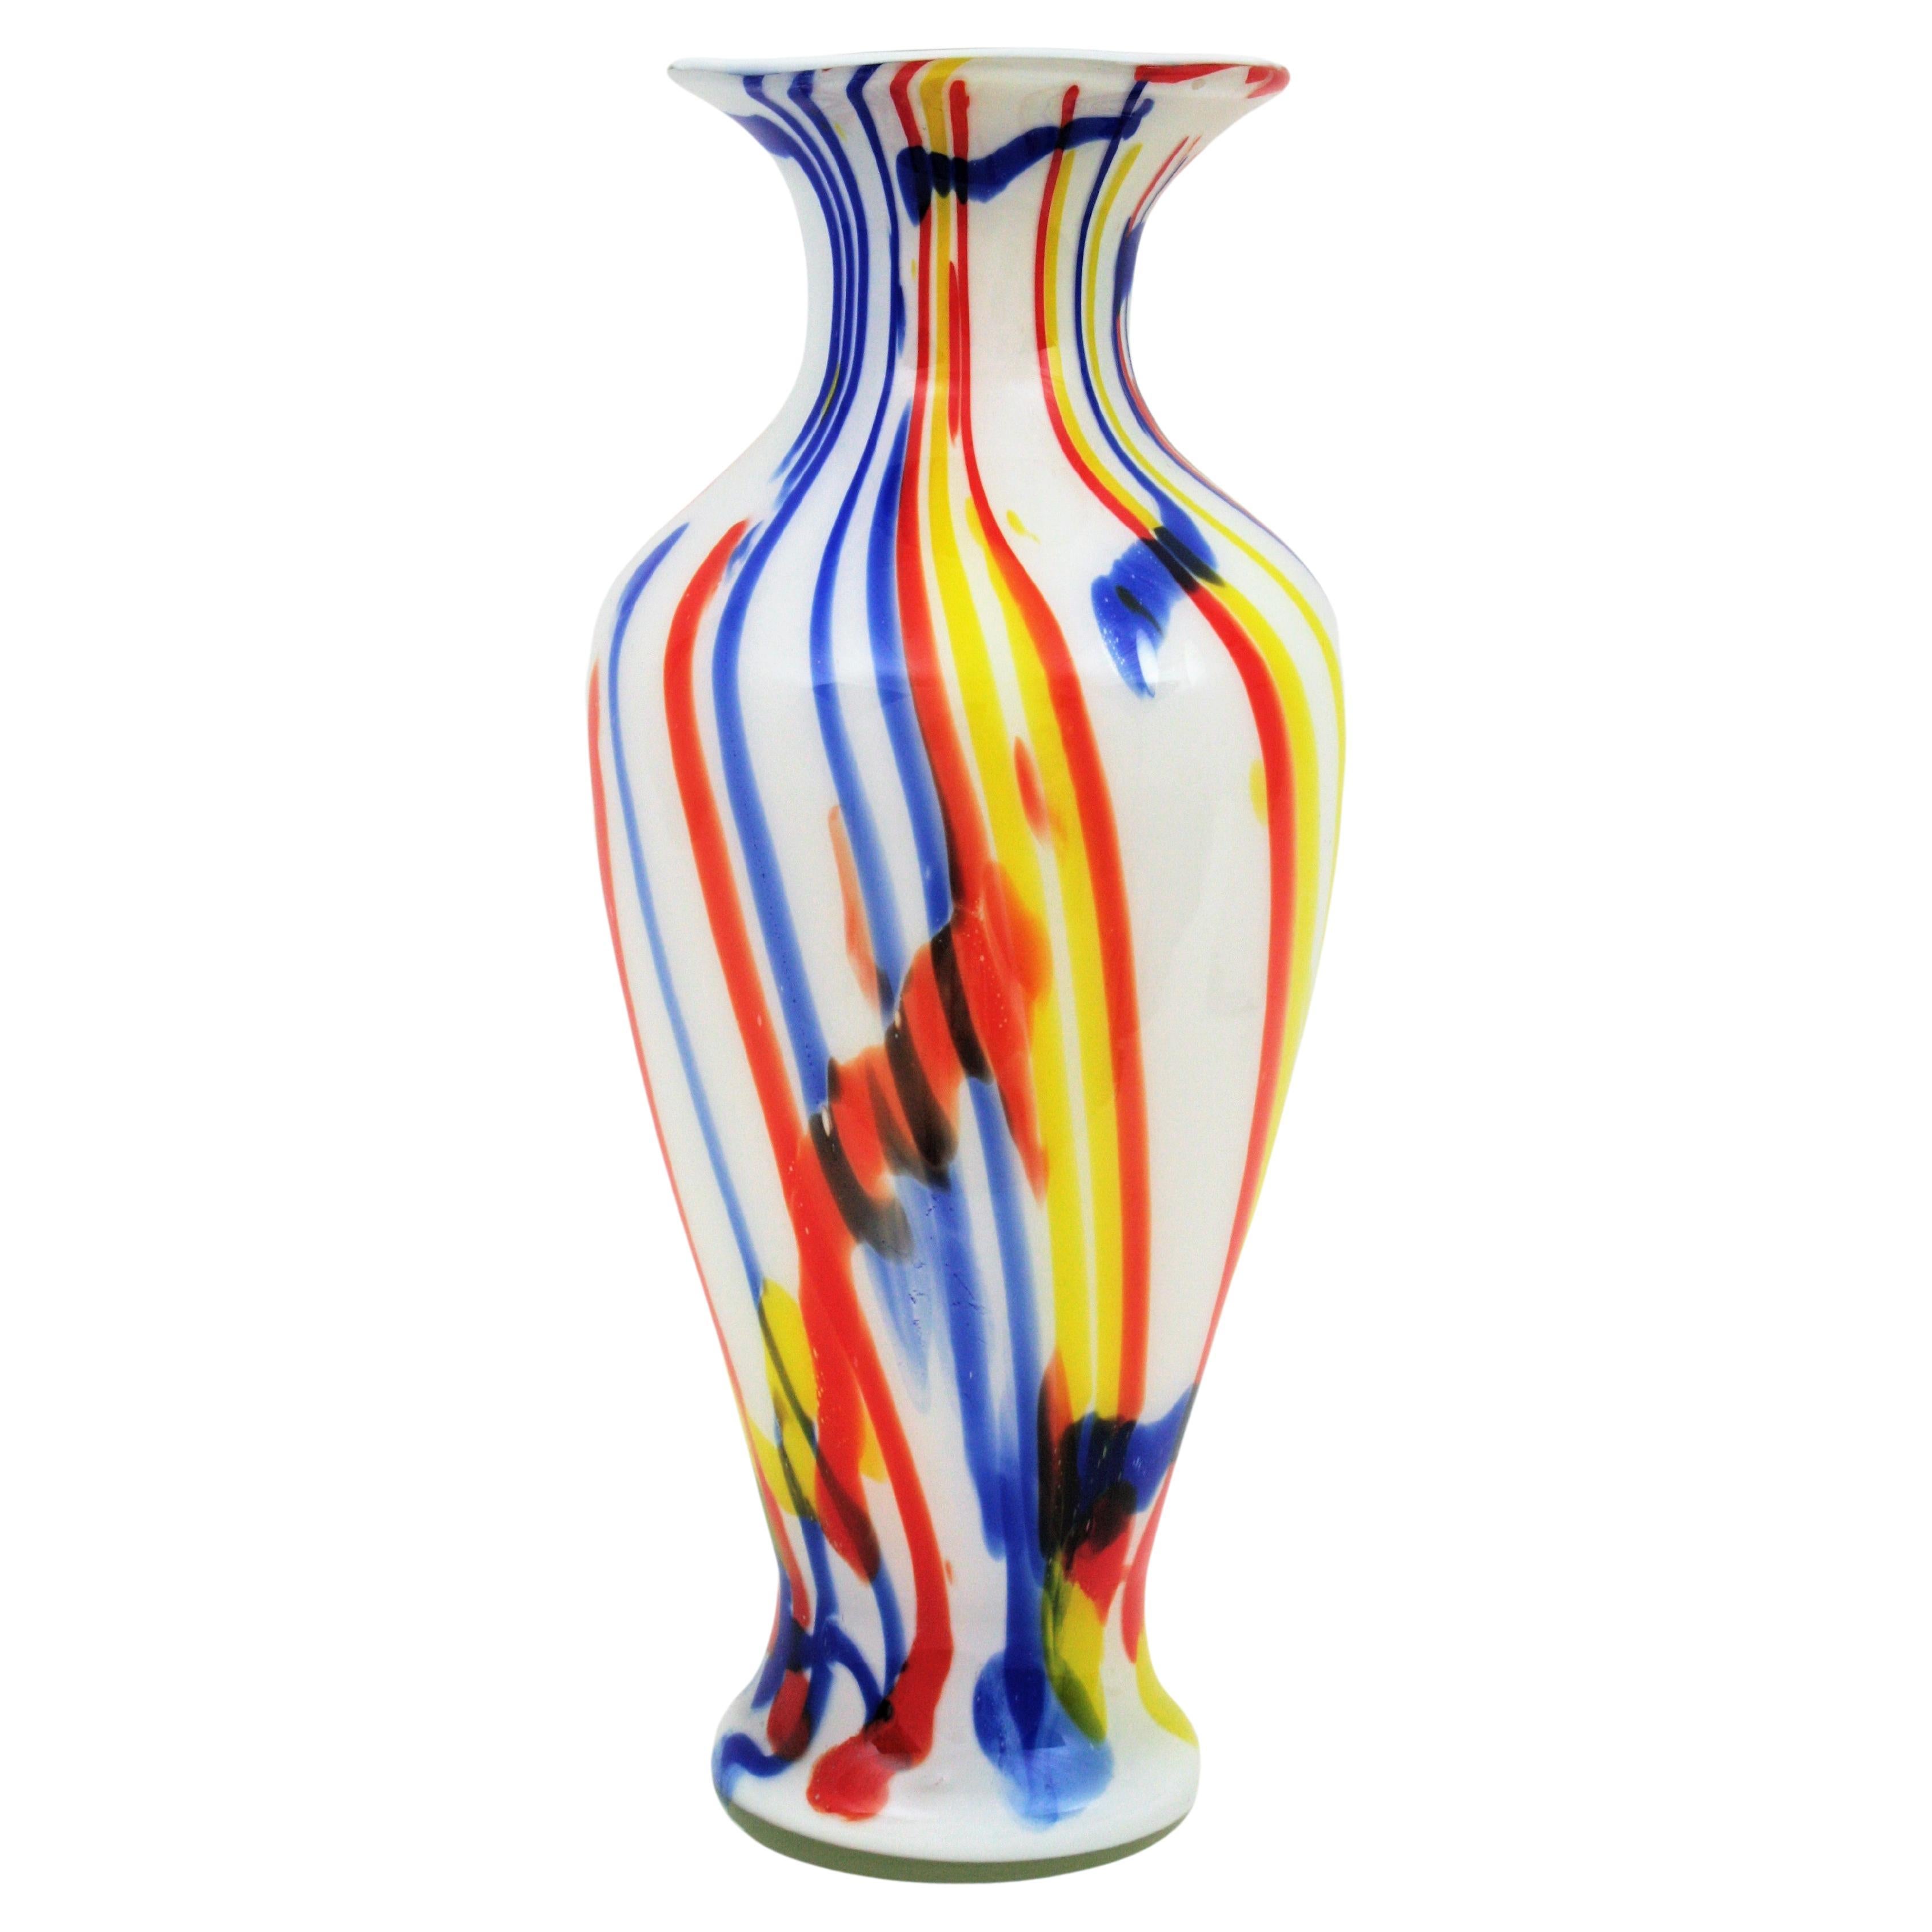 Oversized white hand blown murano art glass vase with multi-color stripes, Italy, 1960s.
Large hand blown Murano glass white vase with a colorful murrine banding decoration in red, yellow, blue.
Beautiful from all sides and great size.
To be used